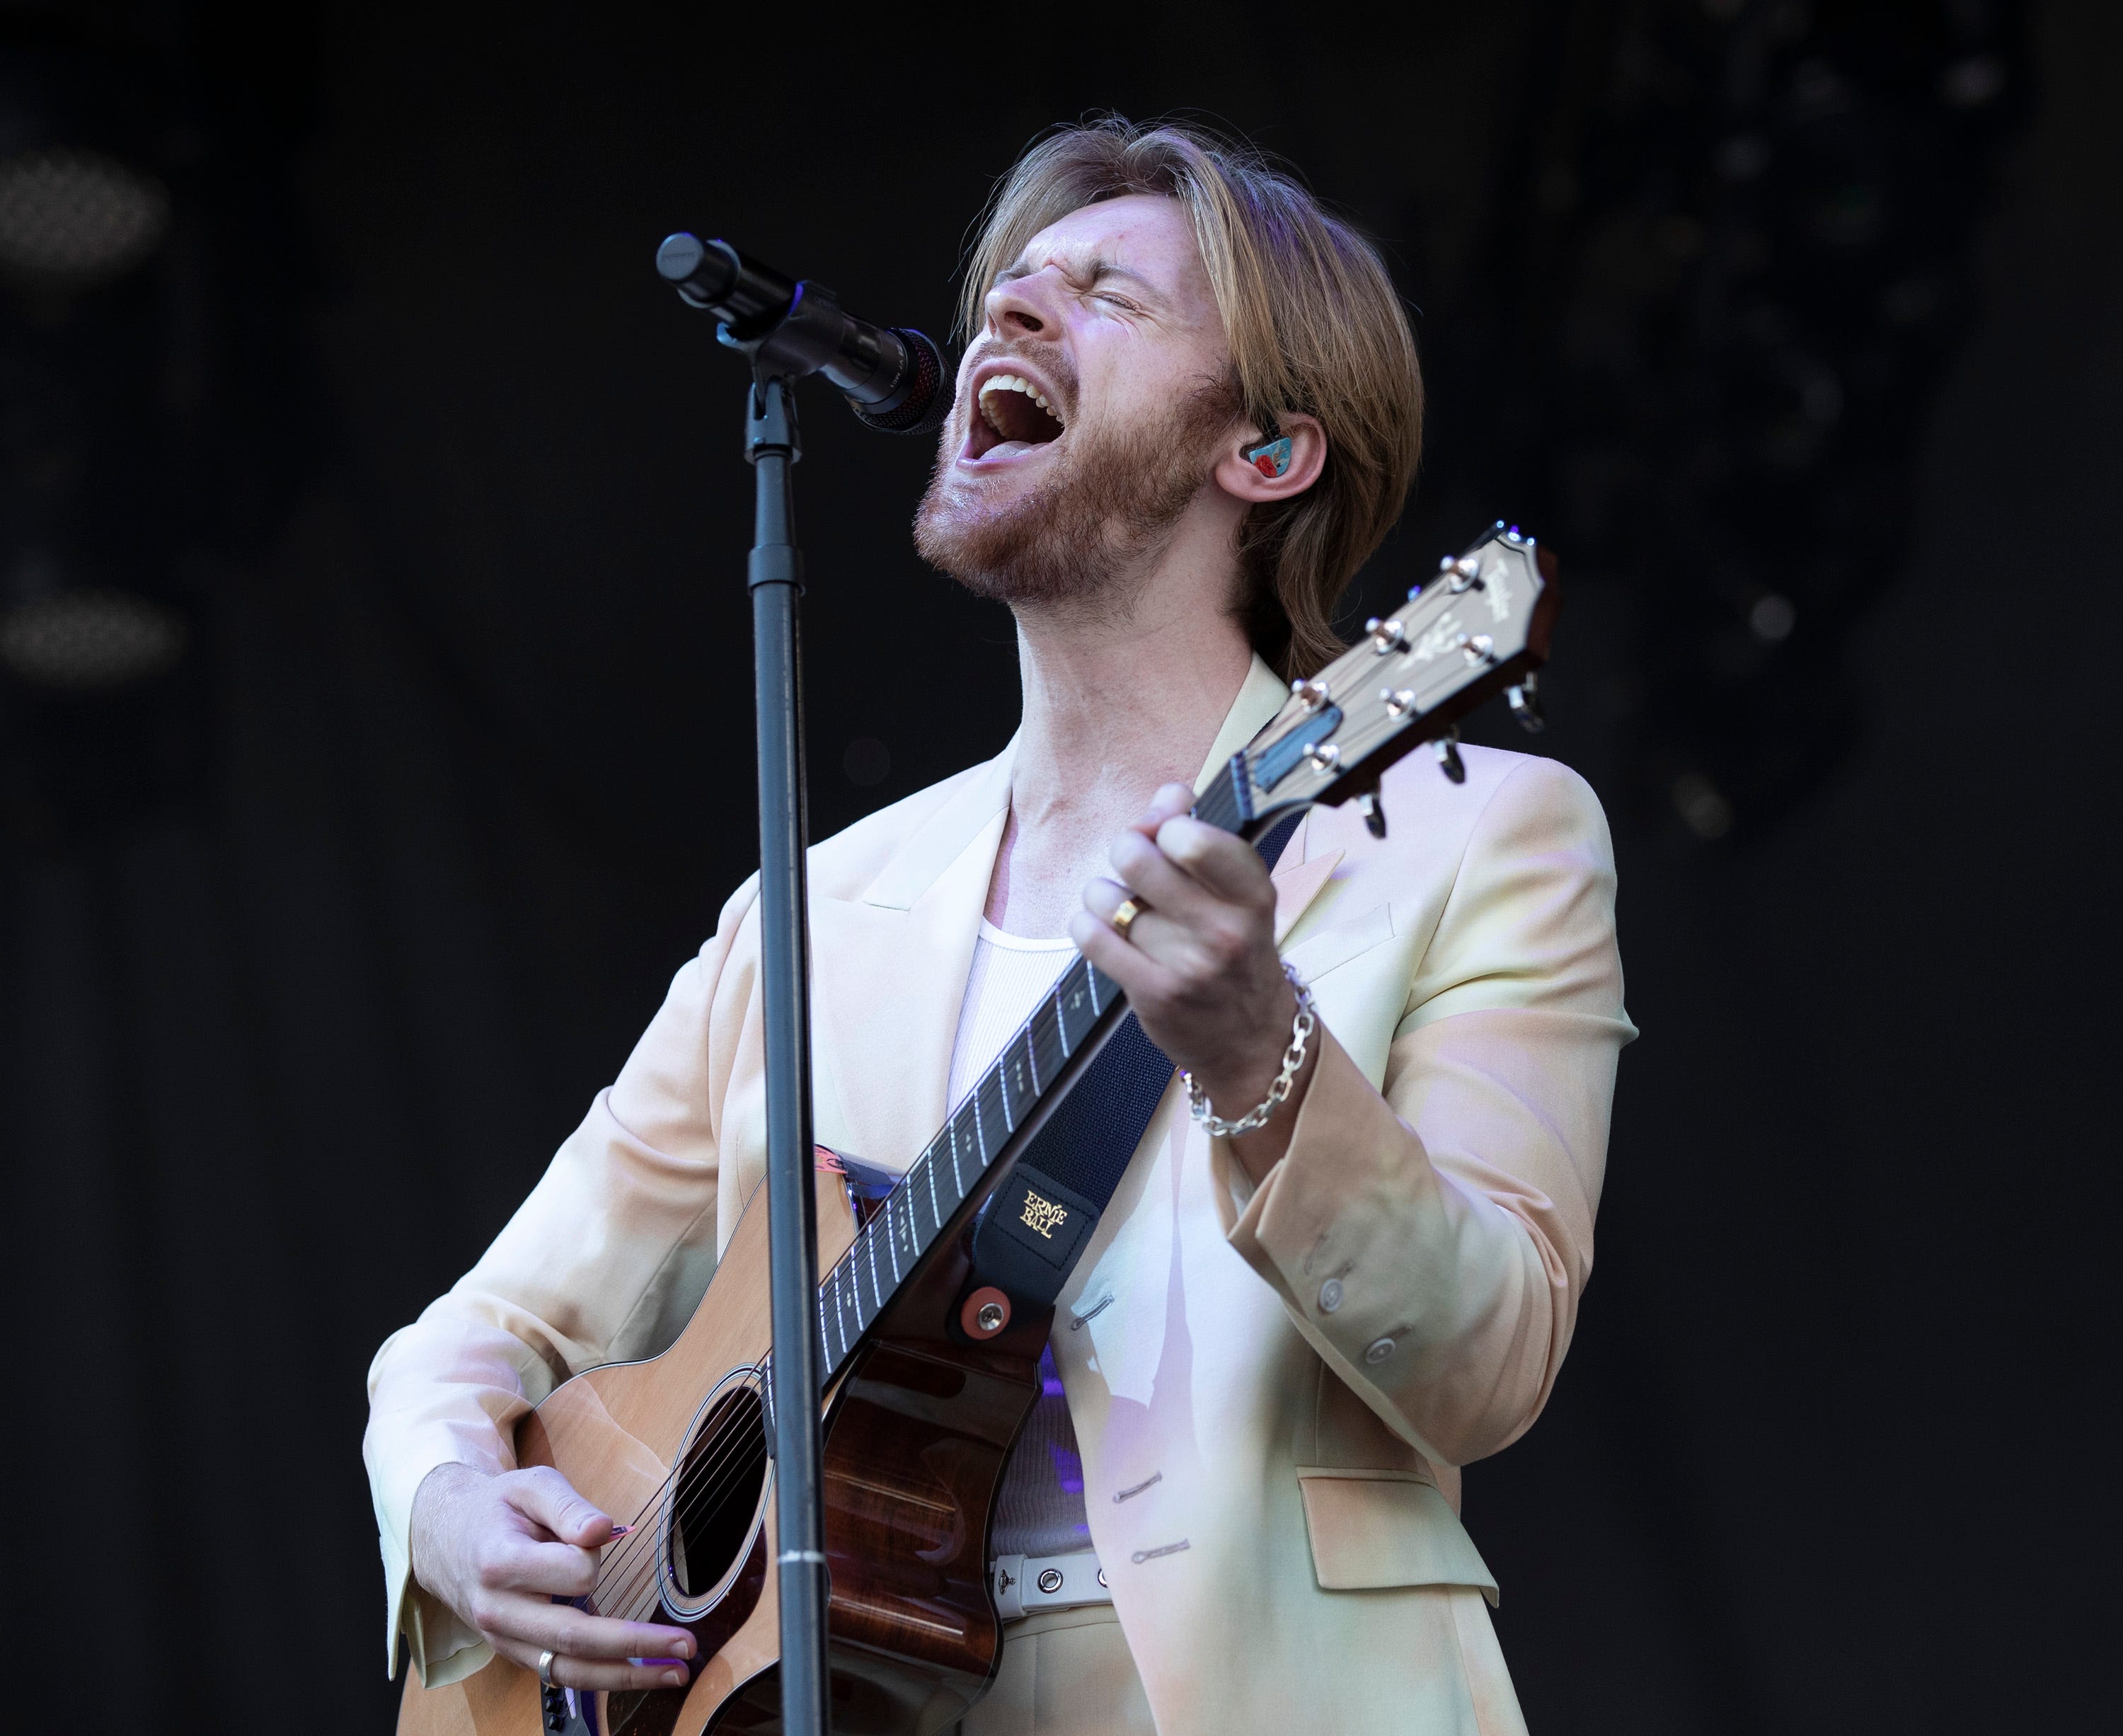 Finneas performs at the Austin City Limits Music Festival in Zilker Park on Friday October 1, 2021.